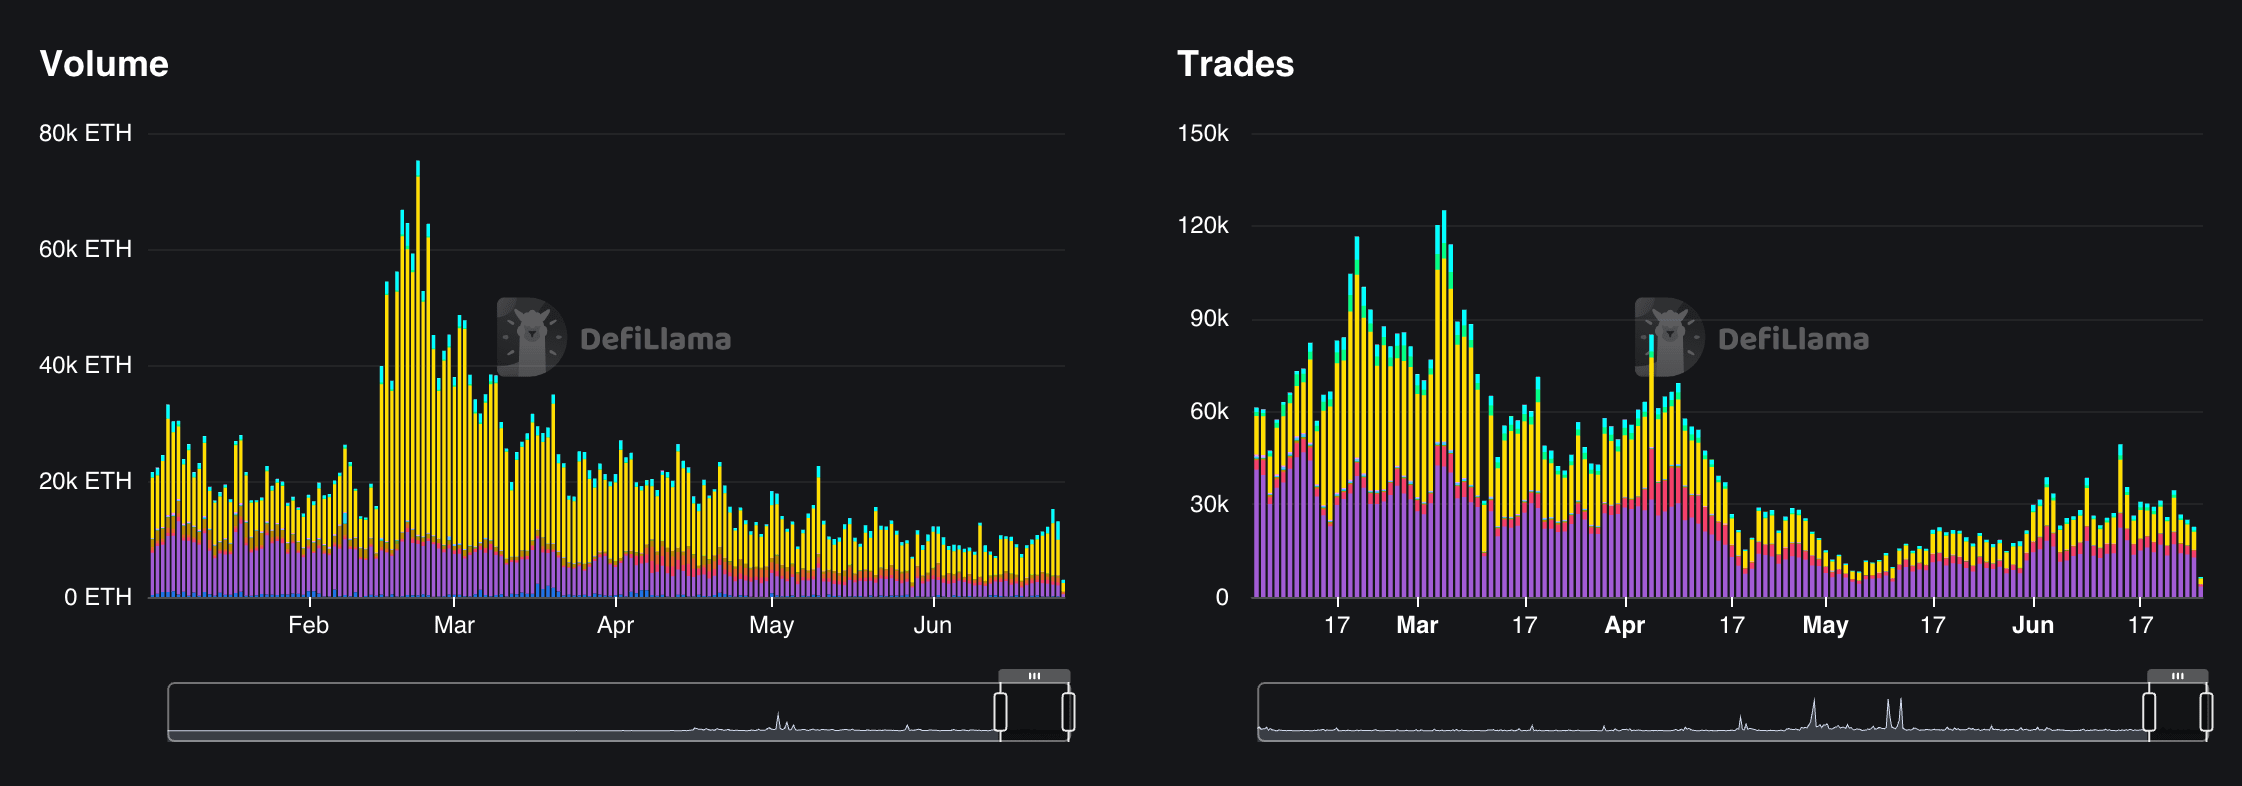 NFT trade volume and trades by marketplace